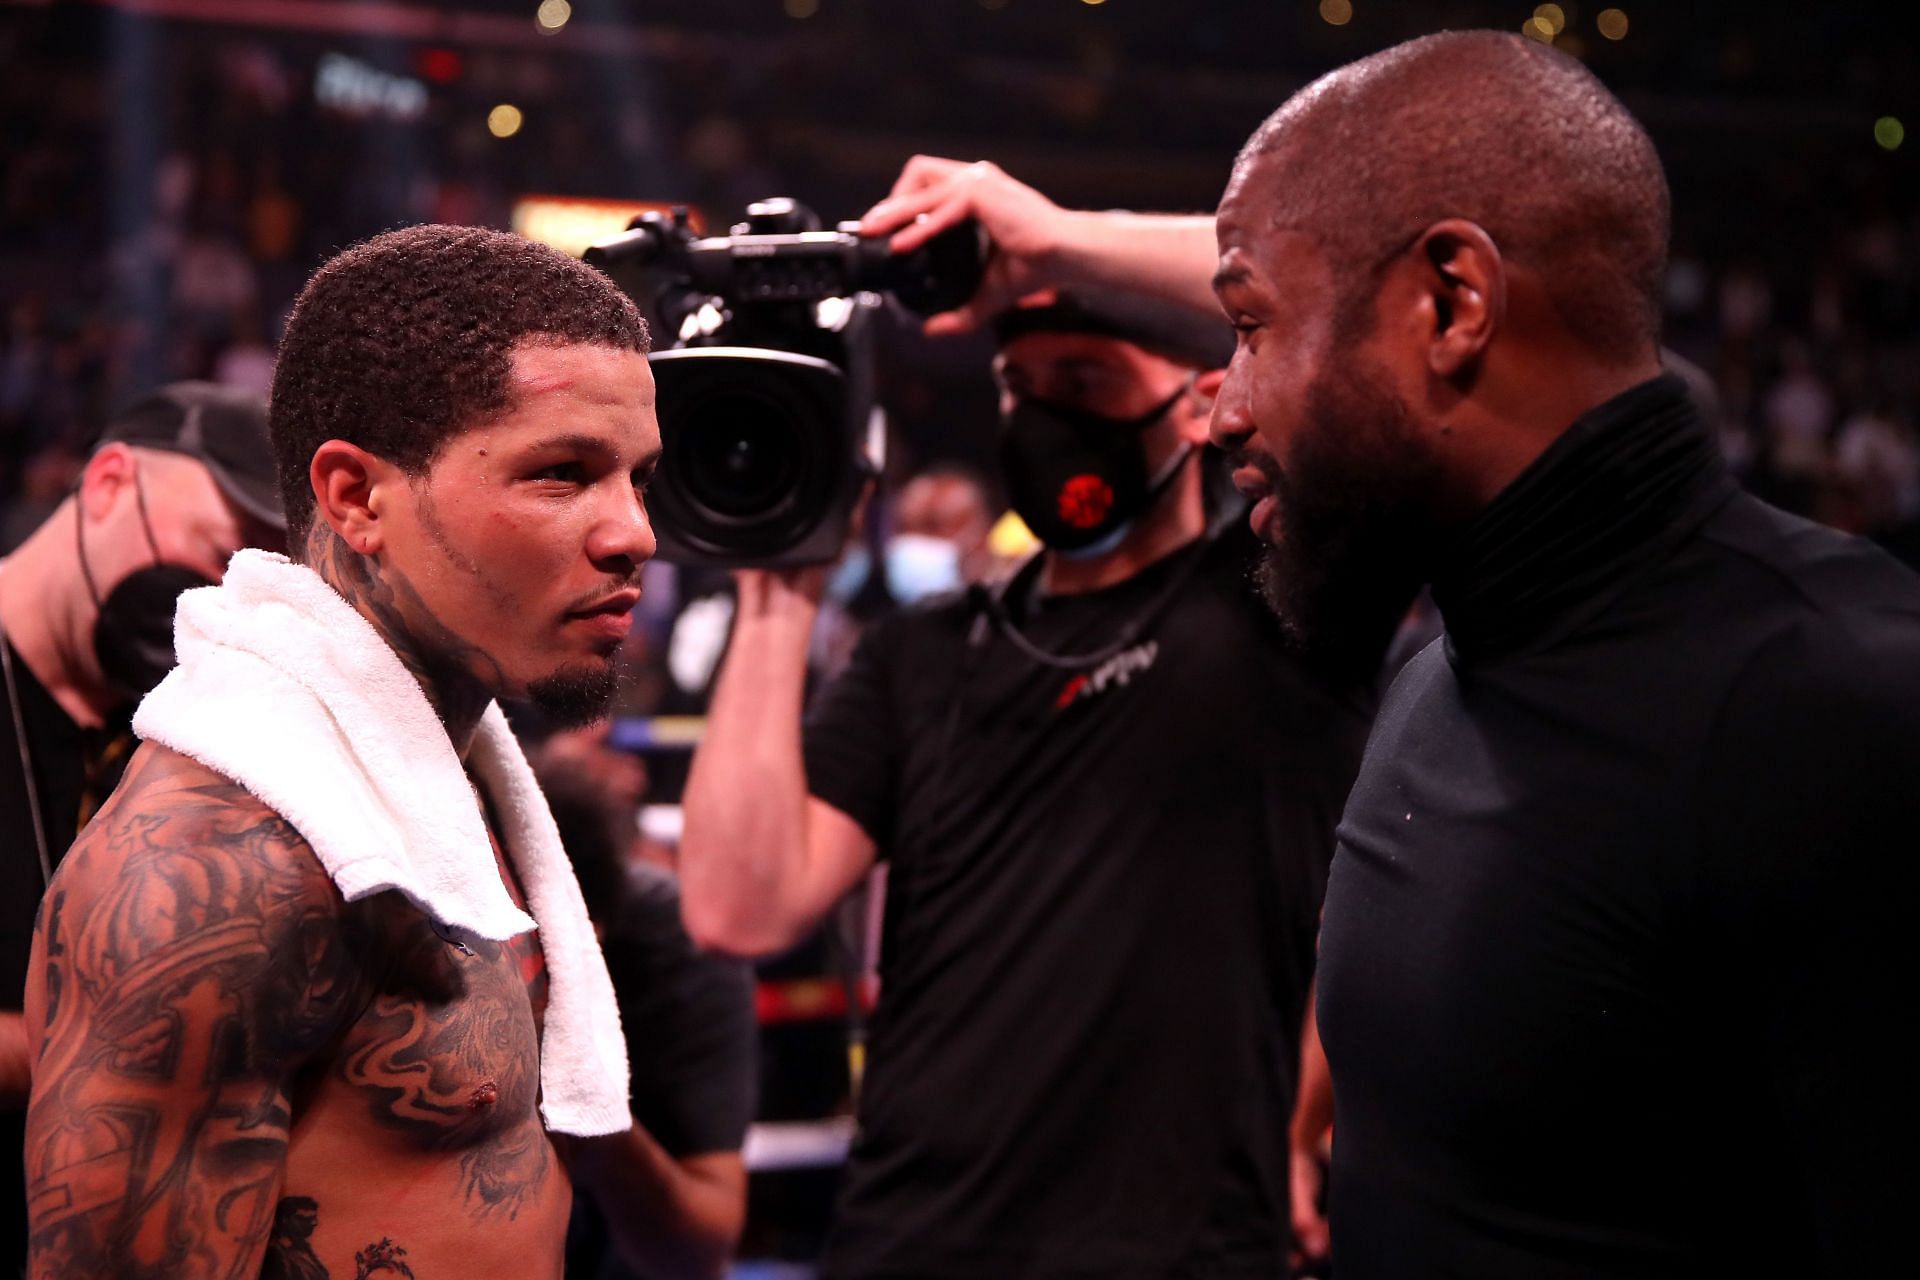 The relationship between Gervonta Davis (L) and Floyd Mayweather (R) has continued to unravel.